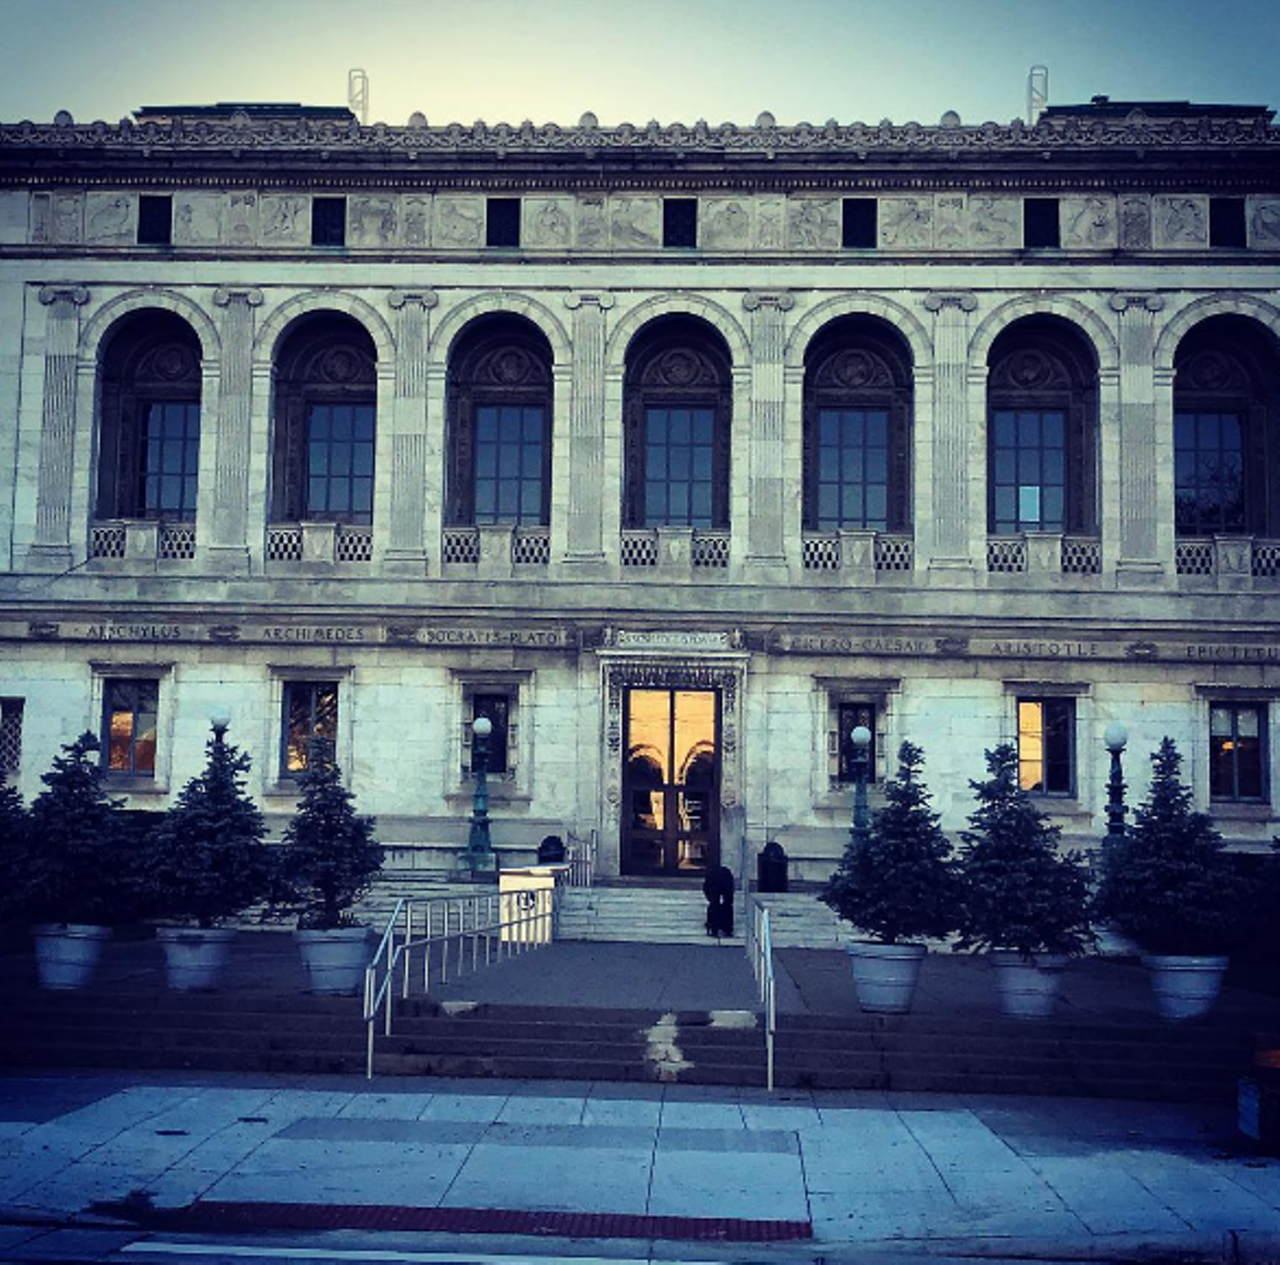 Detroit Public Library
5201 Woodward Ave, Detroit
There are a couple public libraries in Detroit, and they are all marvelous. Tons of books, history, and a quiet space for reflection. 
Photo via IG user @2amandawake